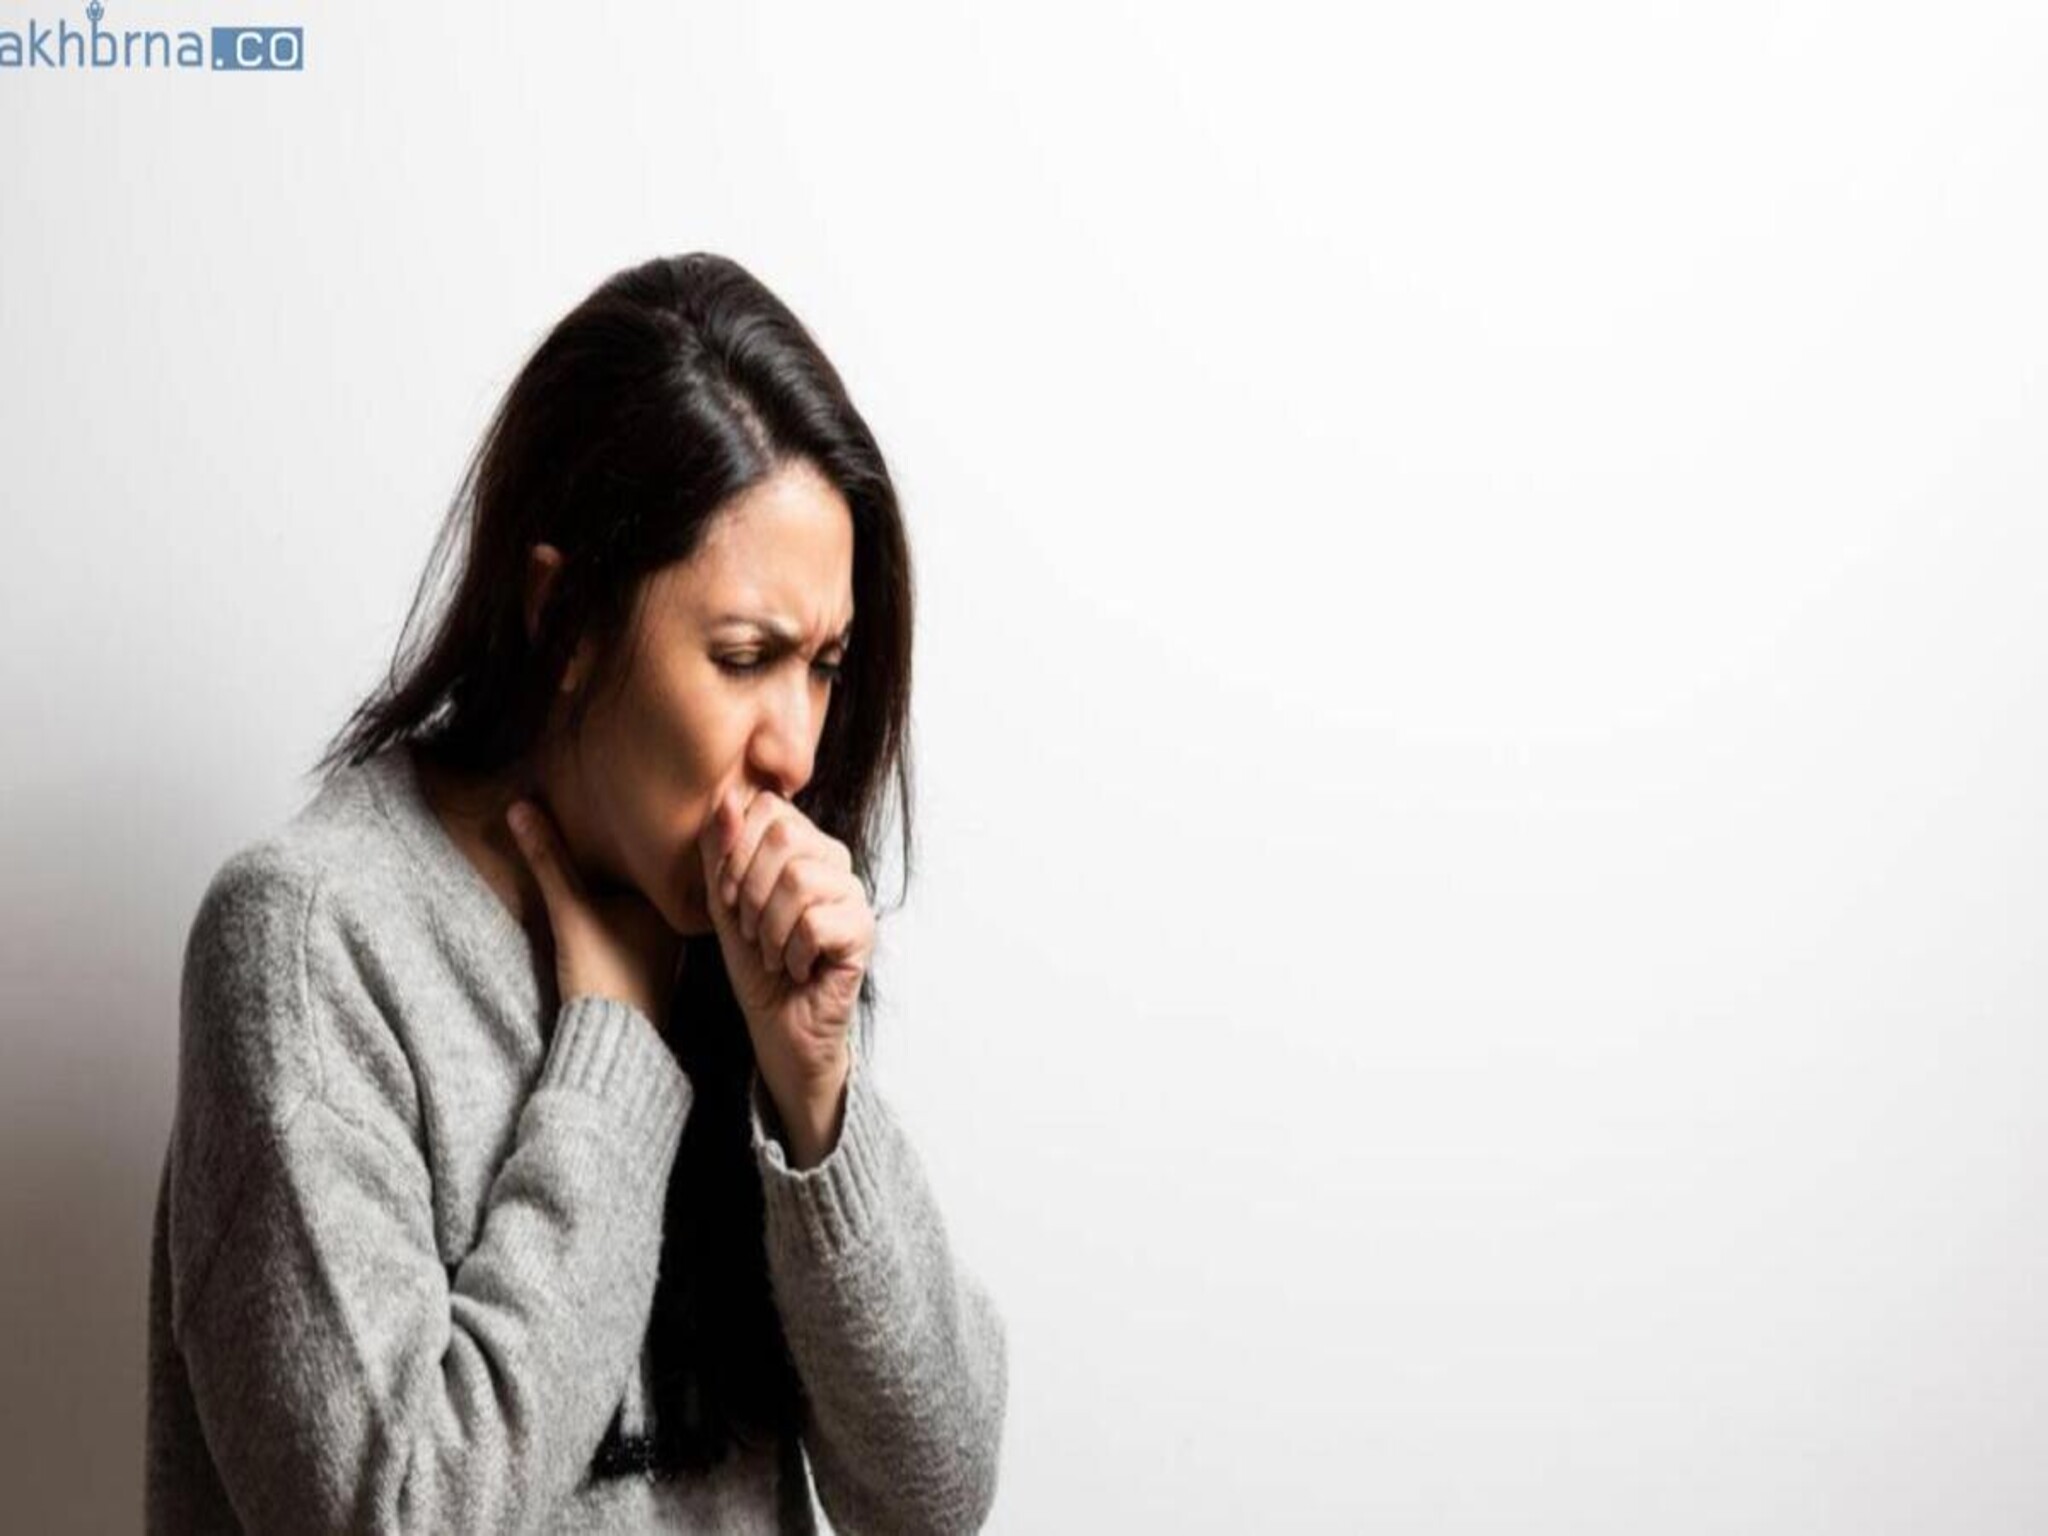 UAE Doctors Caution Residents as Cases of Bronchitis and Pneumonia Surge